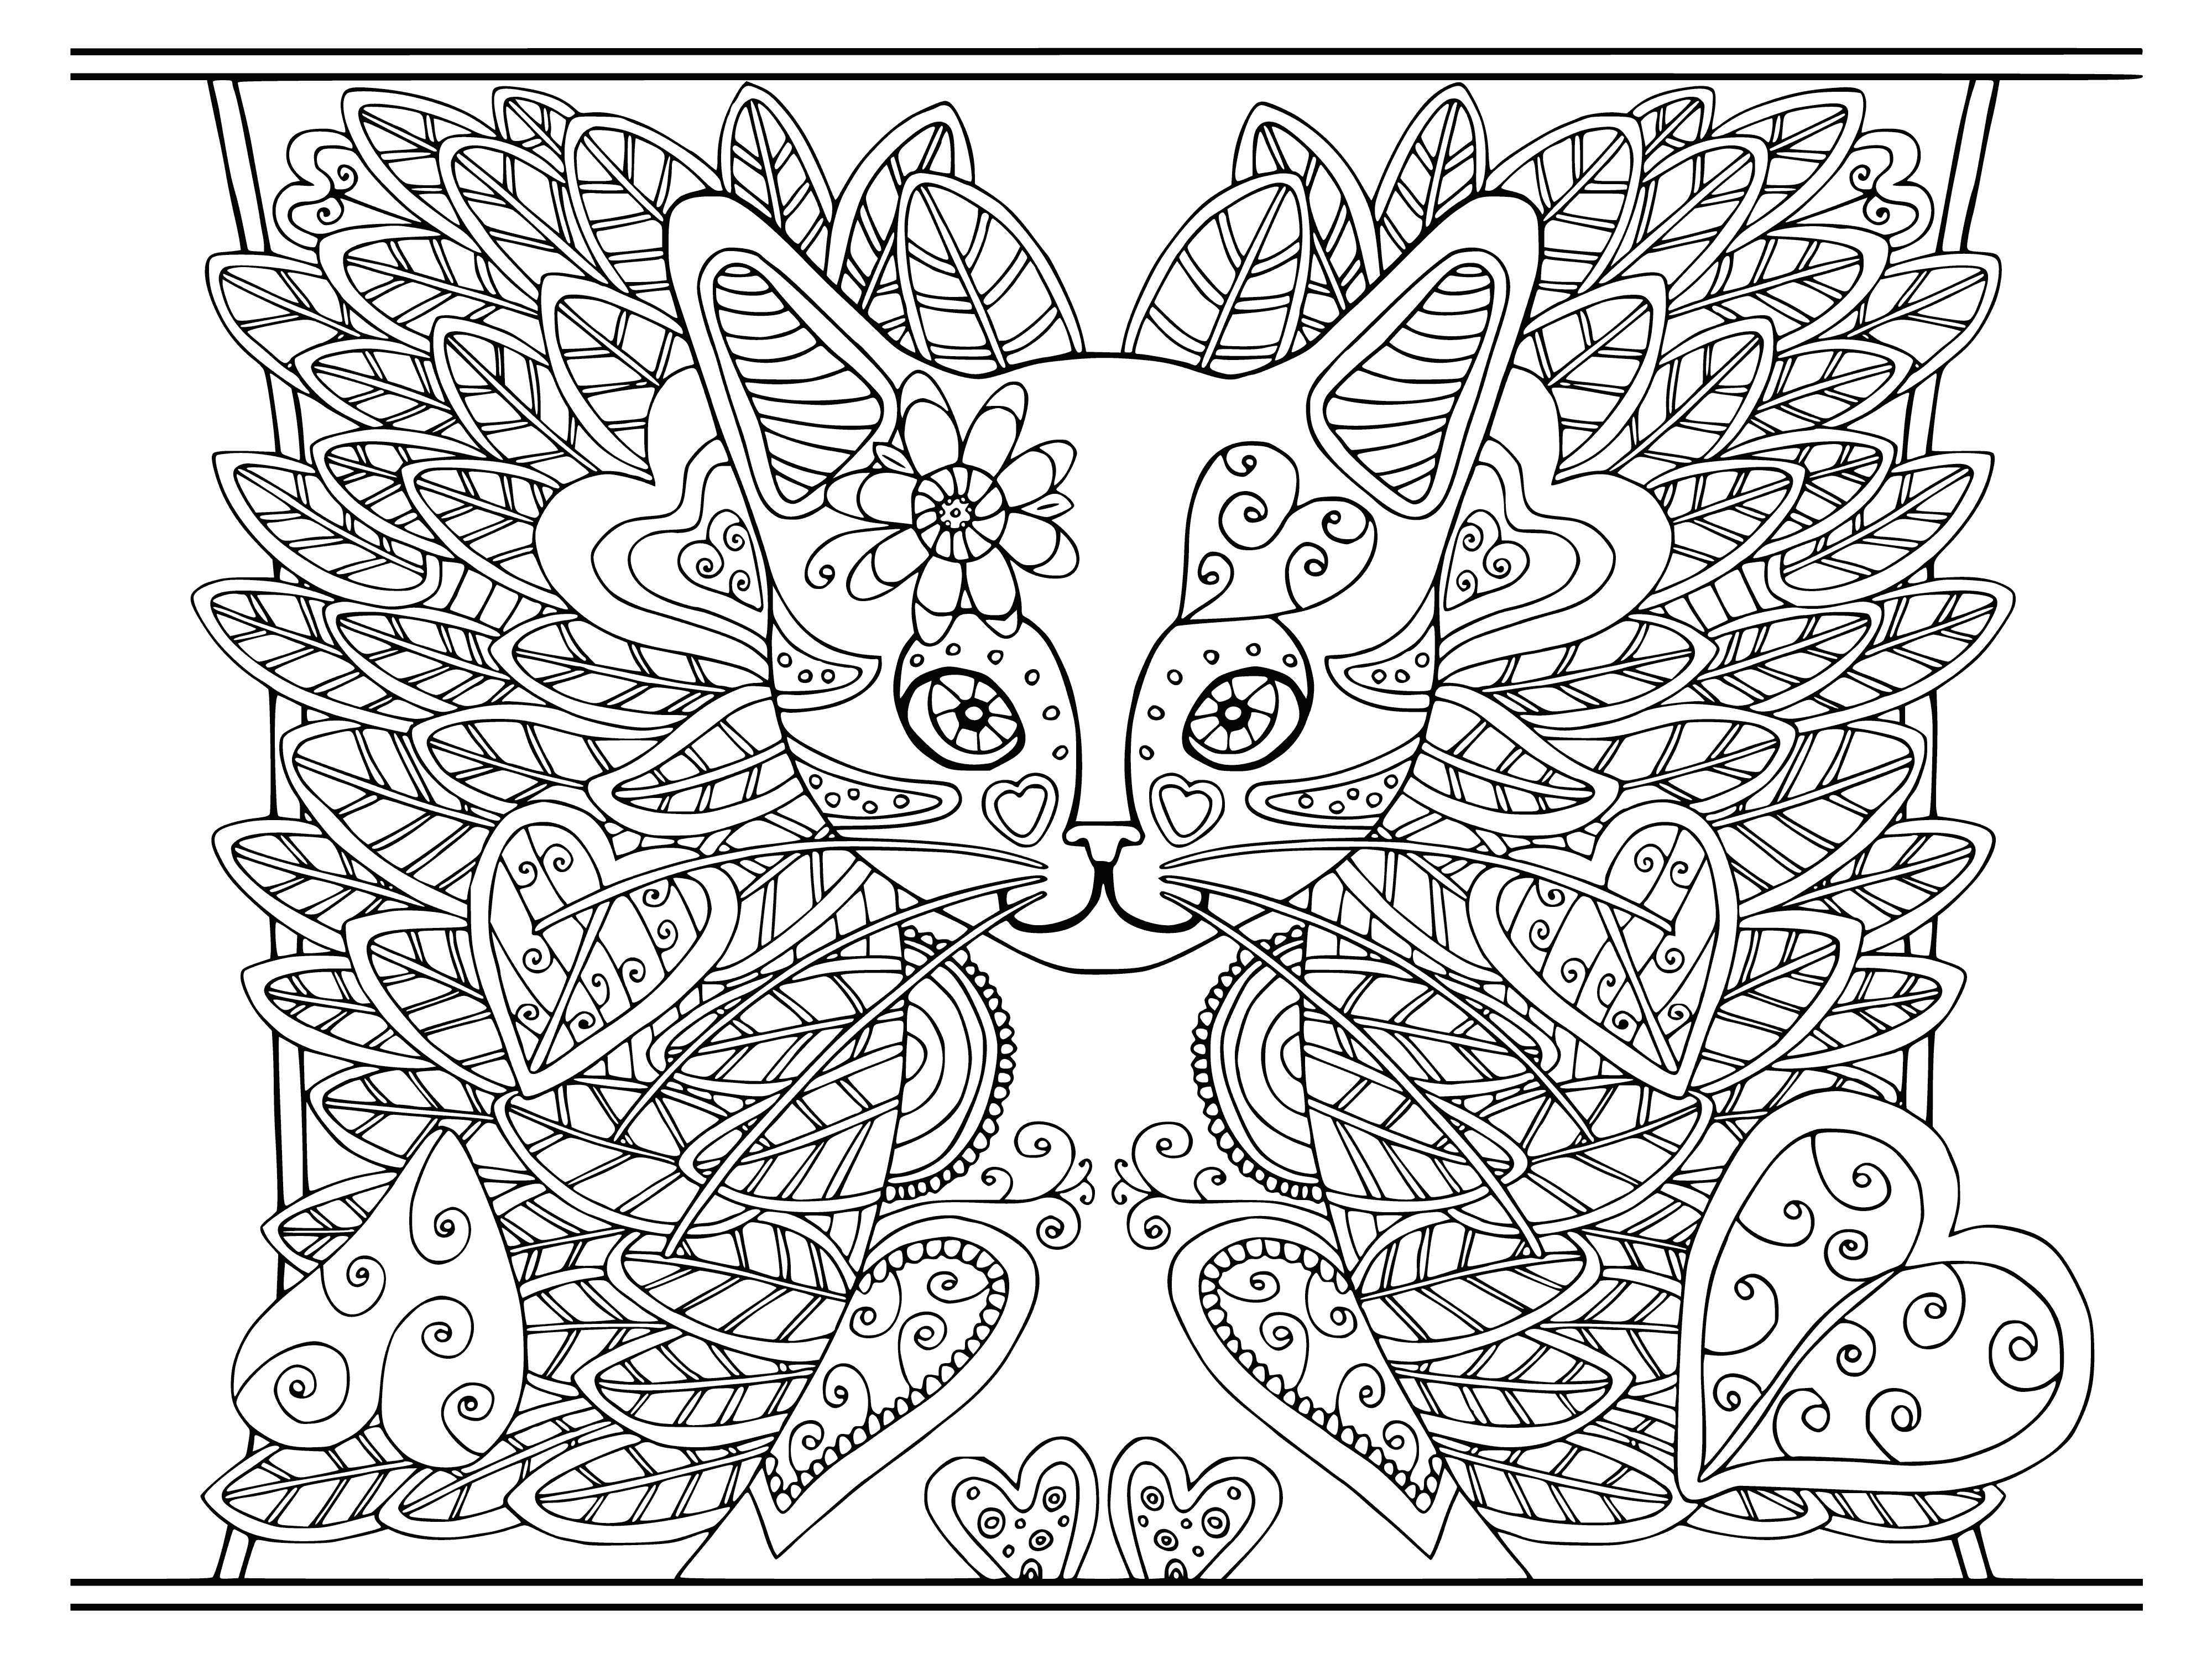 Cat coloring page